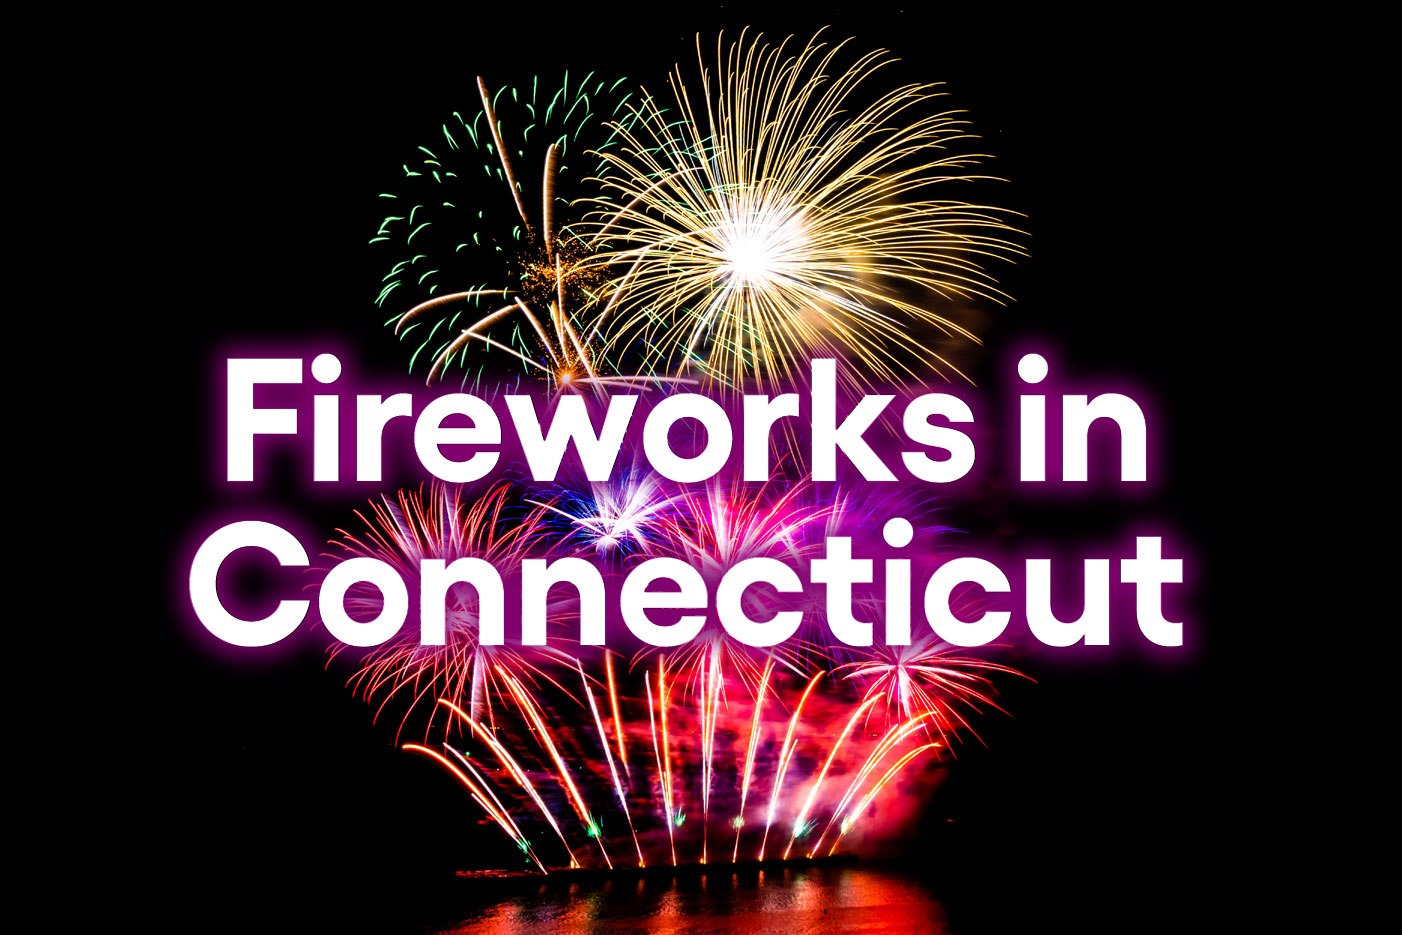 Fireworks in Connecticut